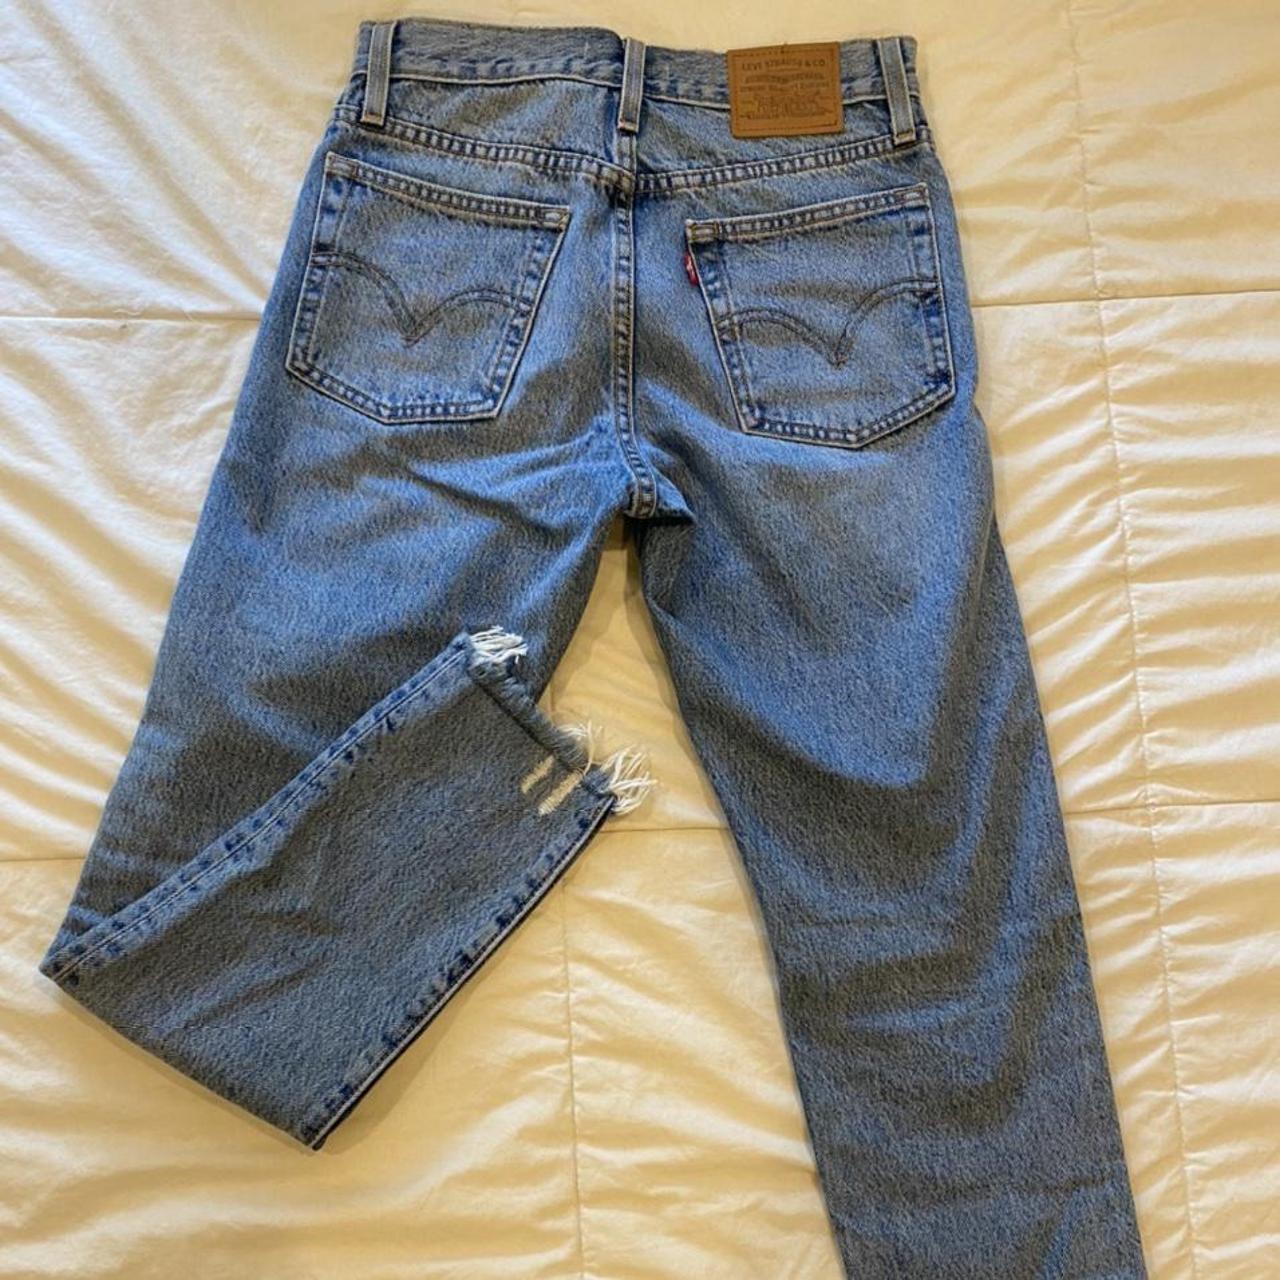 Levi 501 wedgie straight jeans. Worn once* for... - Depop